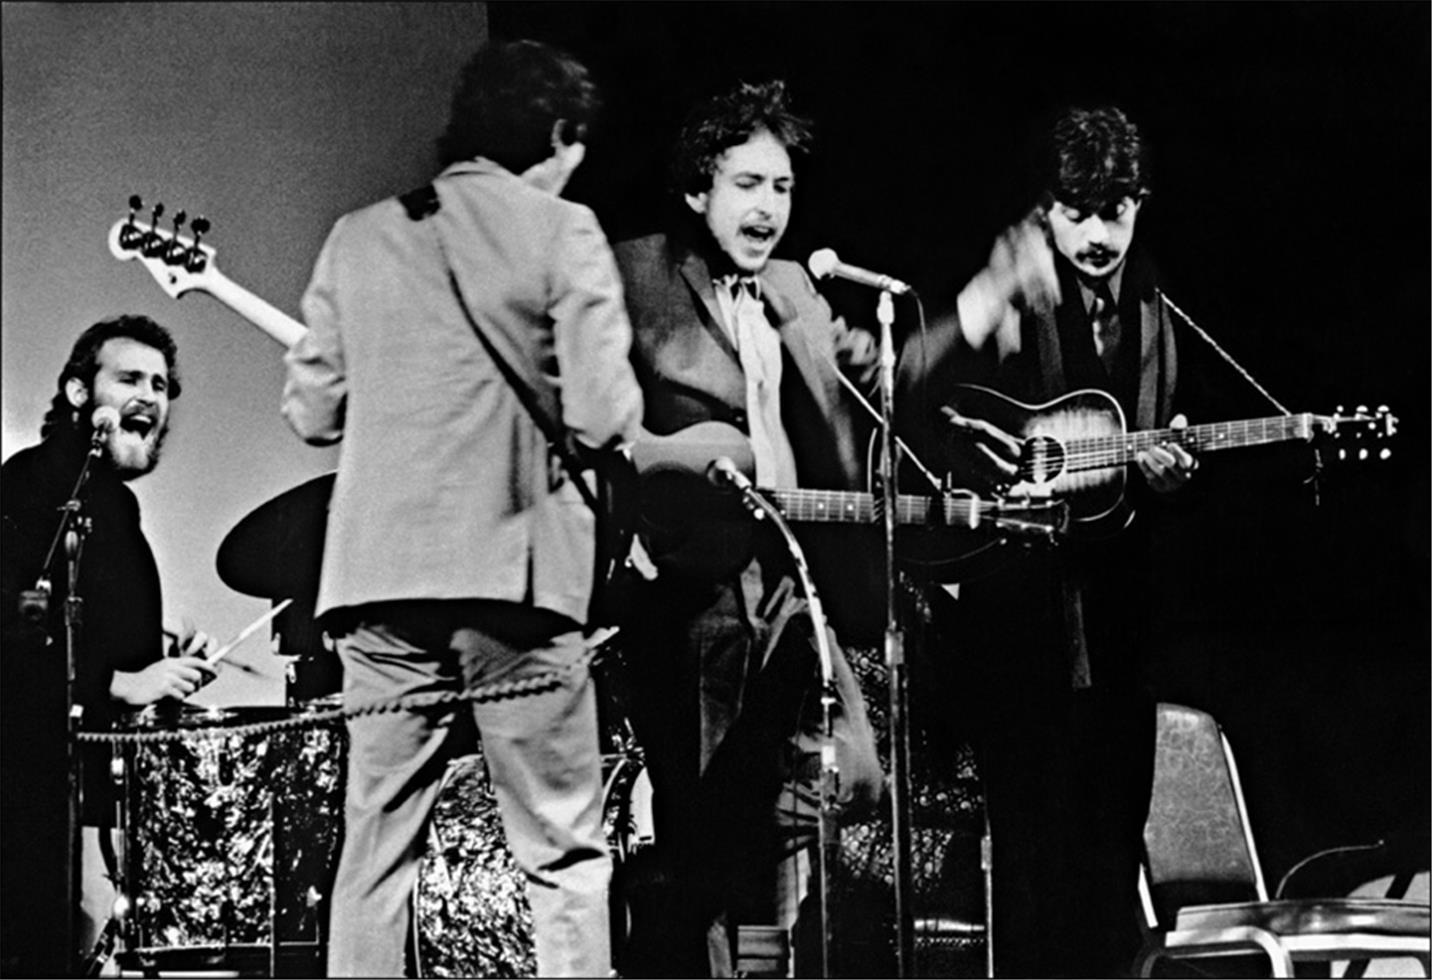 Elliott Landy Black and White Photograph - Bob Dylan and The Band, Woody Guthrie Memorial Concert, Carnegie Hall, 1968